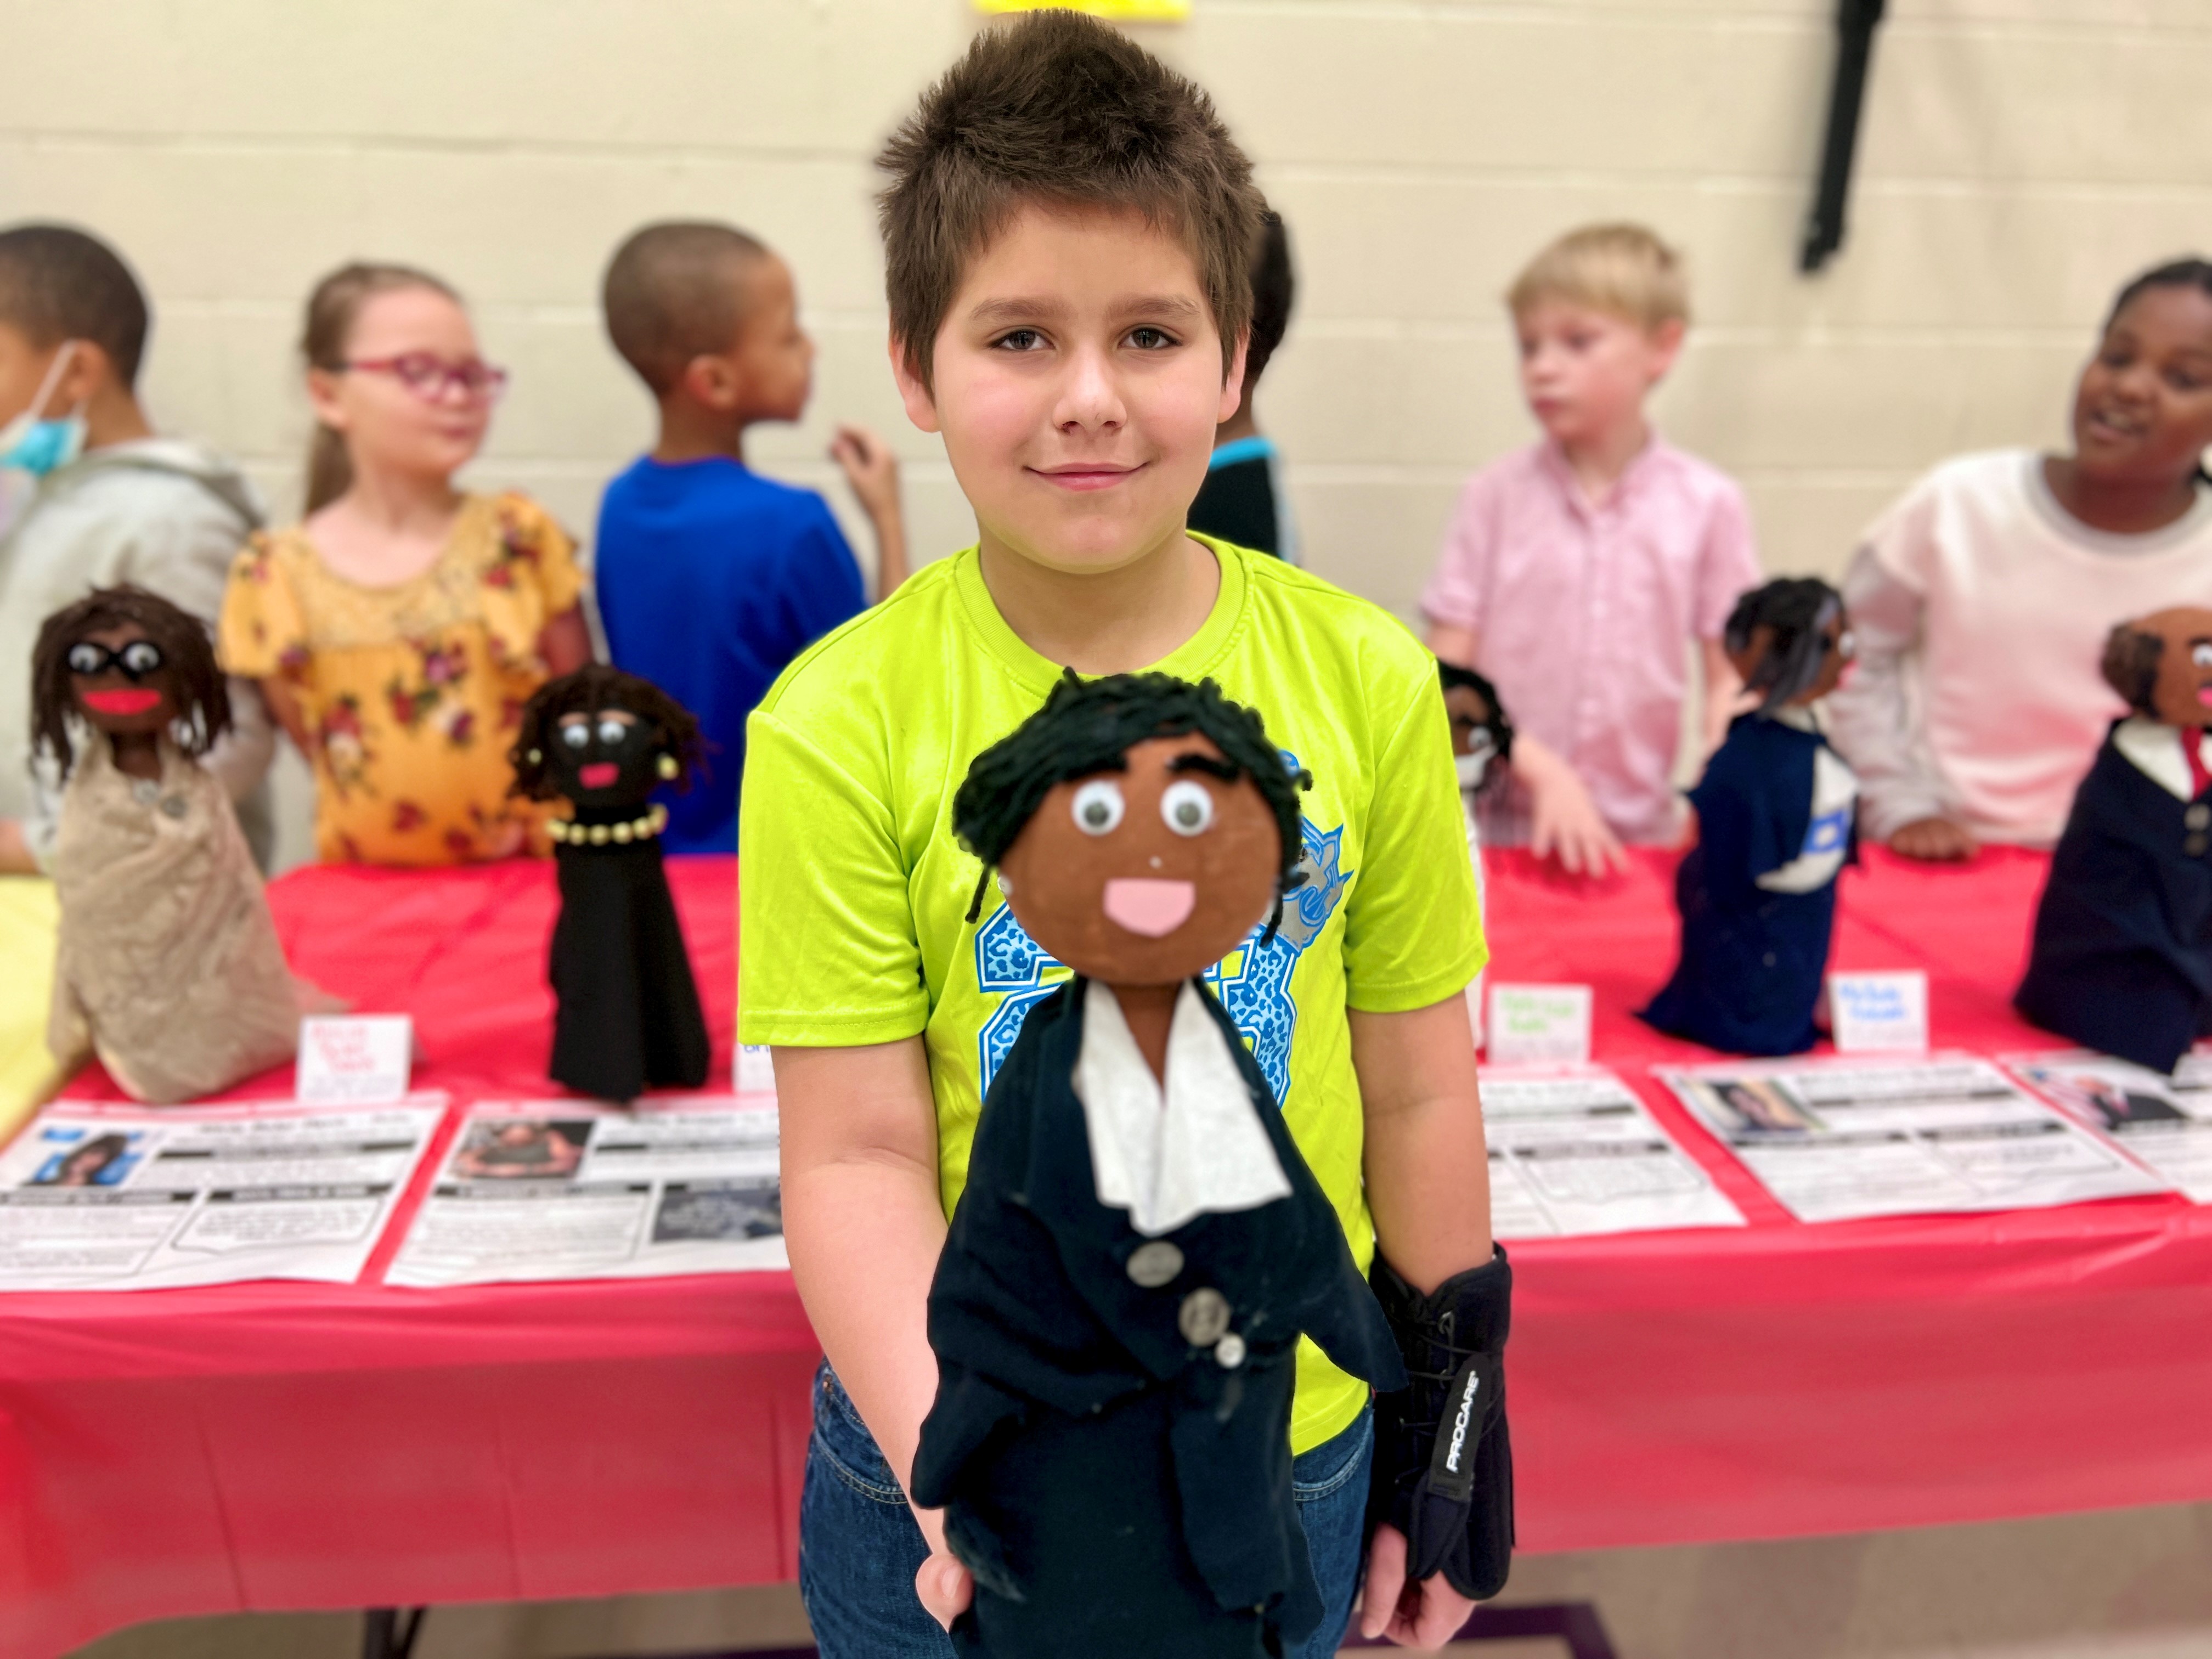 Third-grade student Xavier Berens shows off his bottle buddy of Rosalind Brewer, who is one of only two Black female  CEOs of Fortune 500 companies.